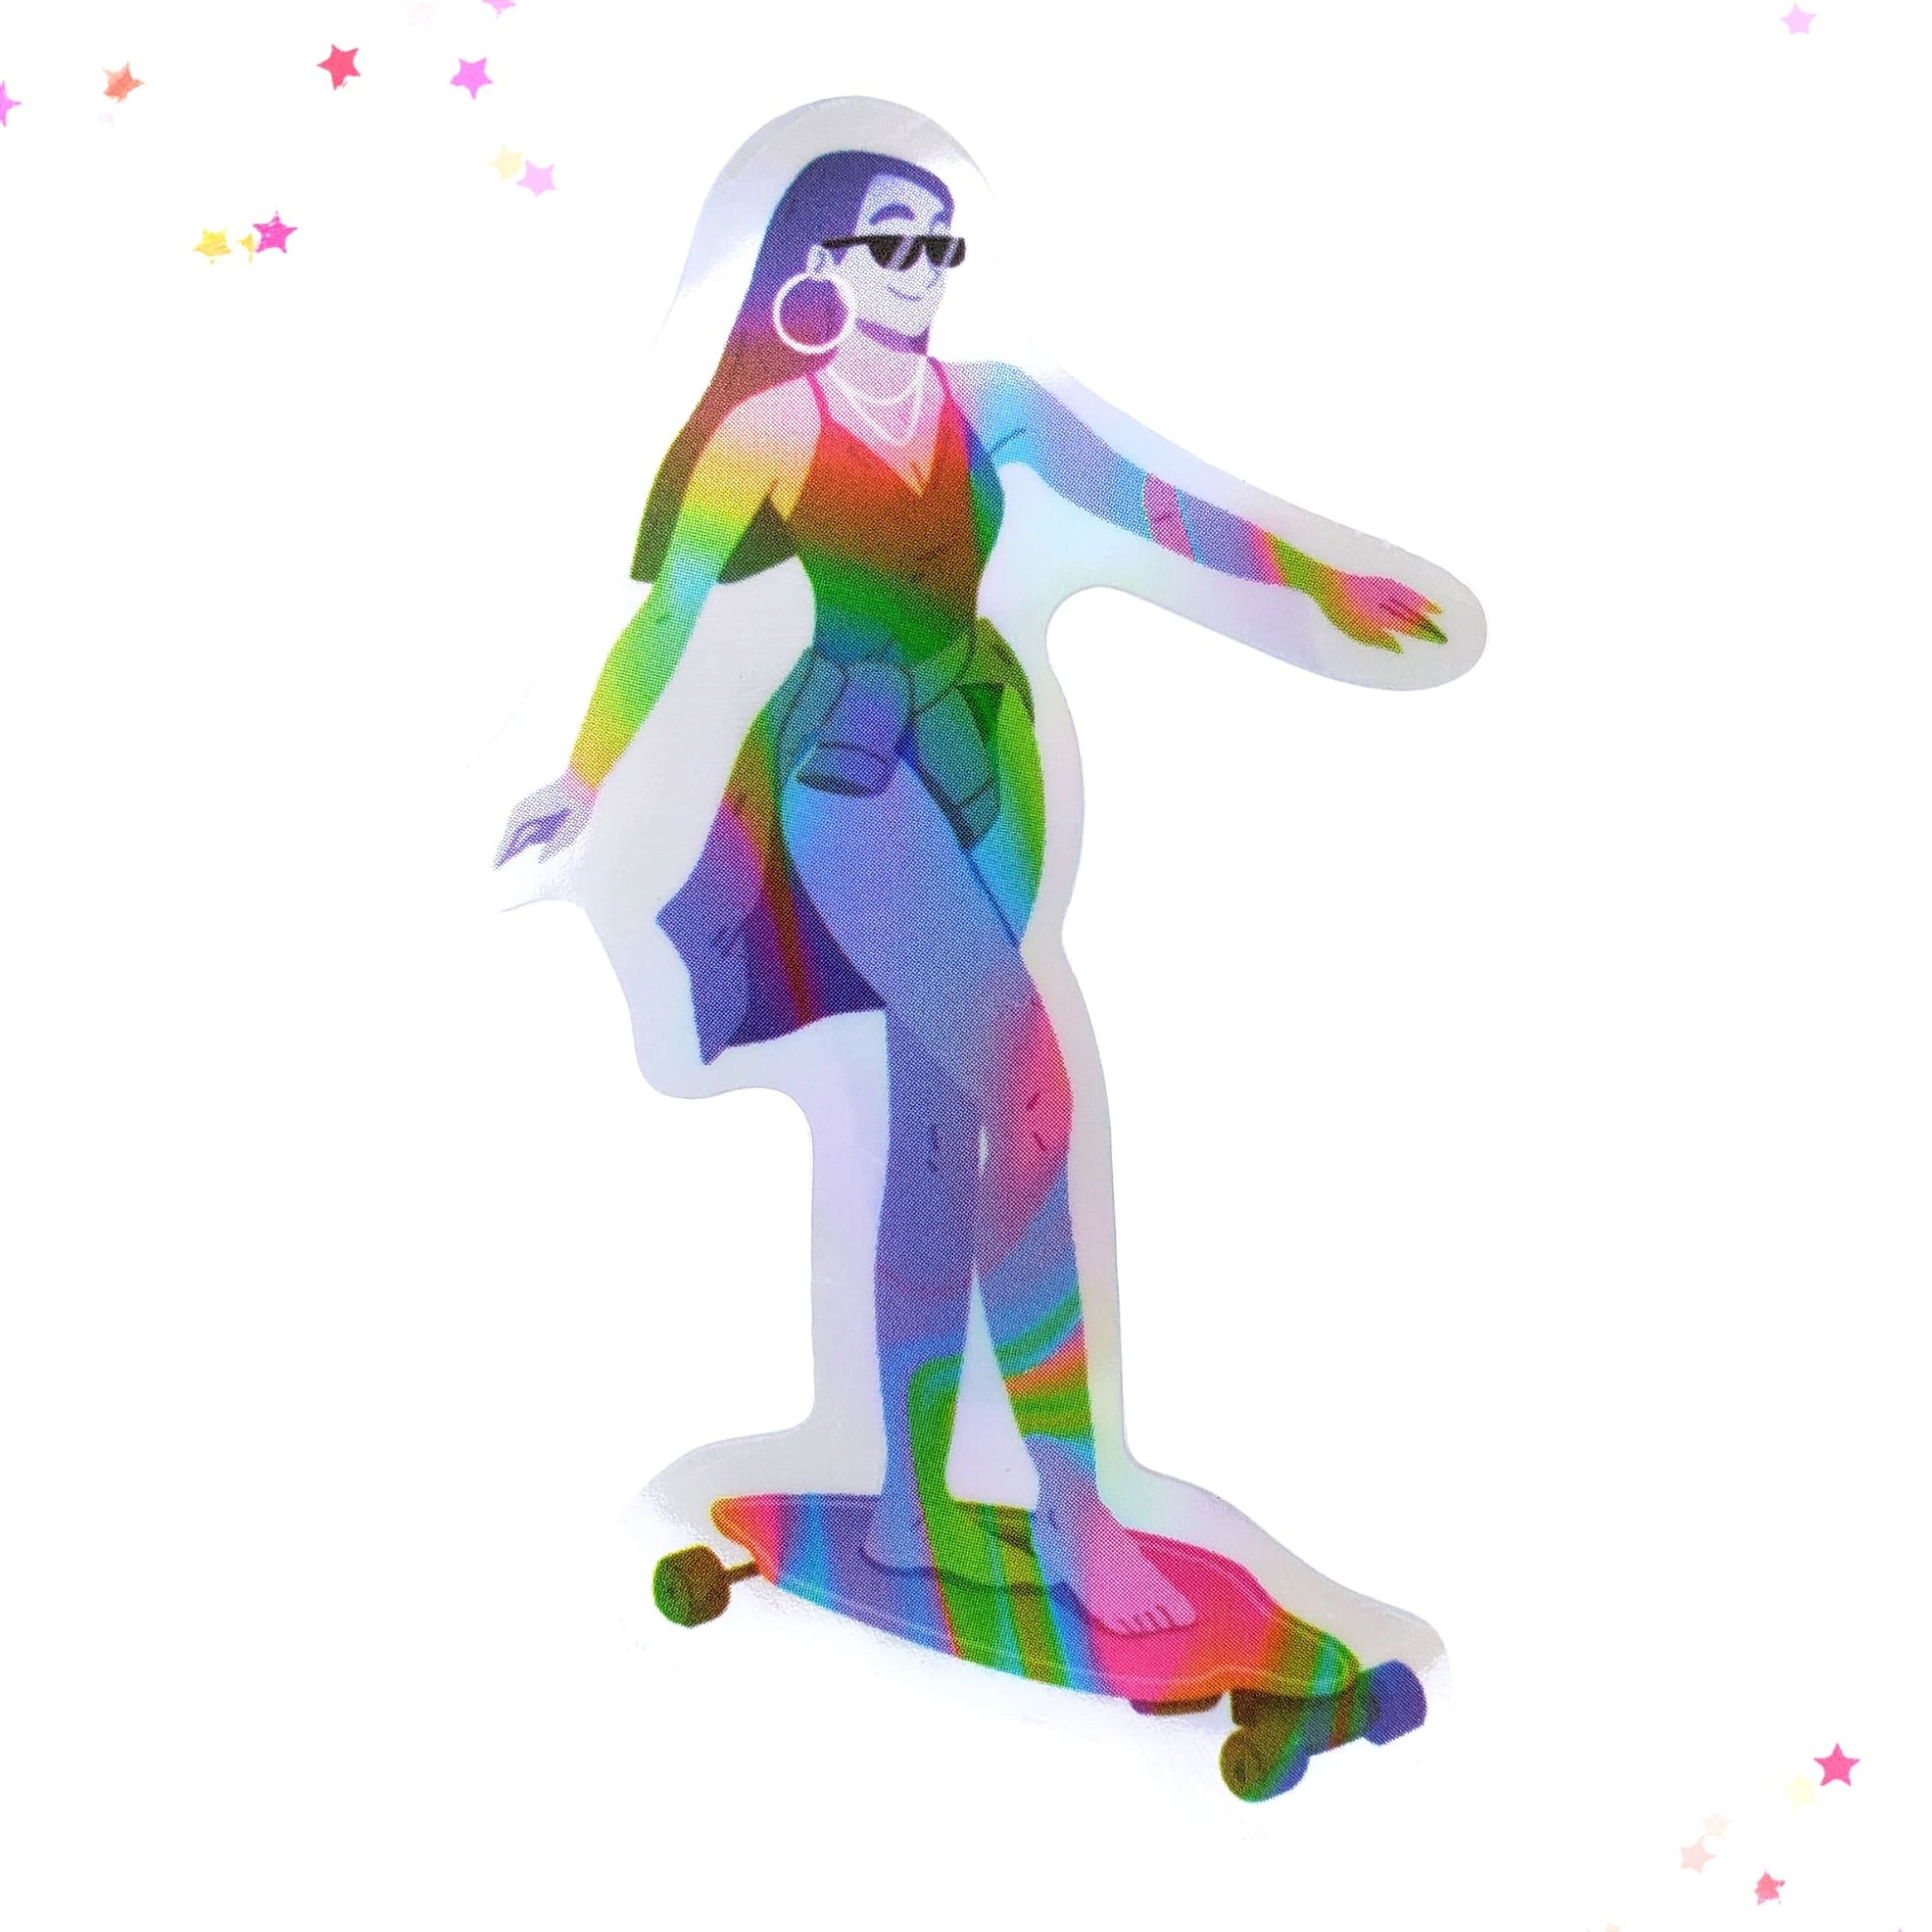 Skateboarding in Style Waterproof Holographic Sticker from Confetti Kitty, Only 1.0